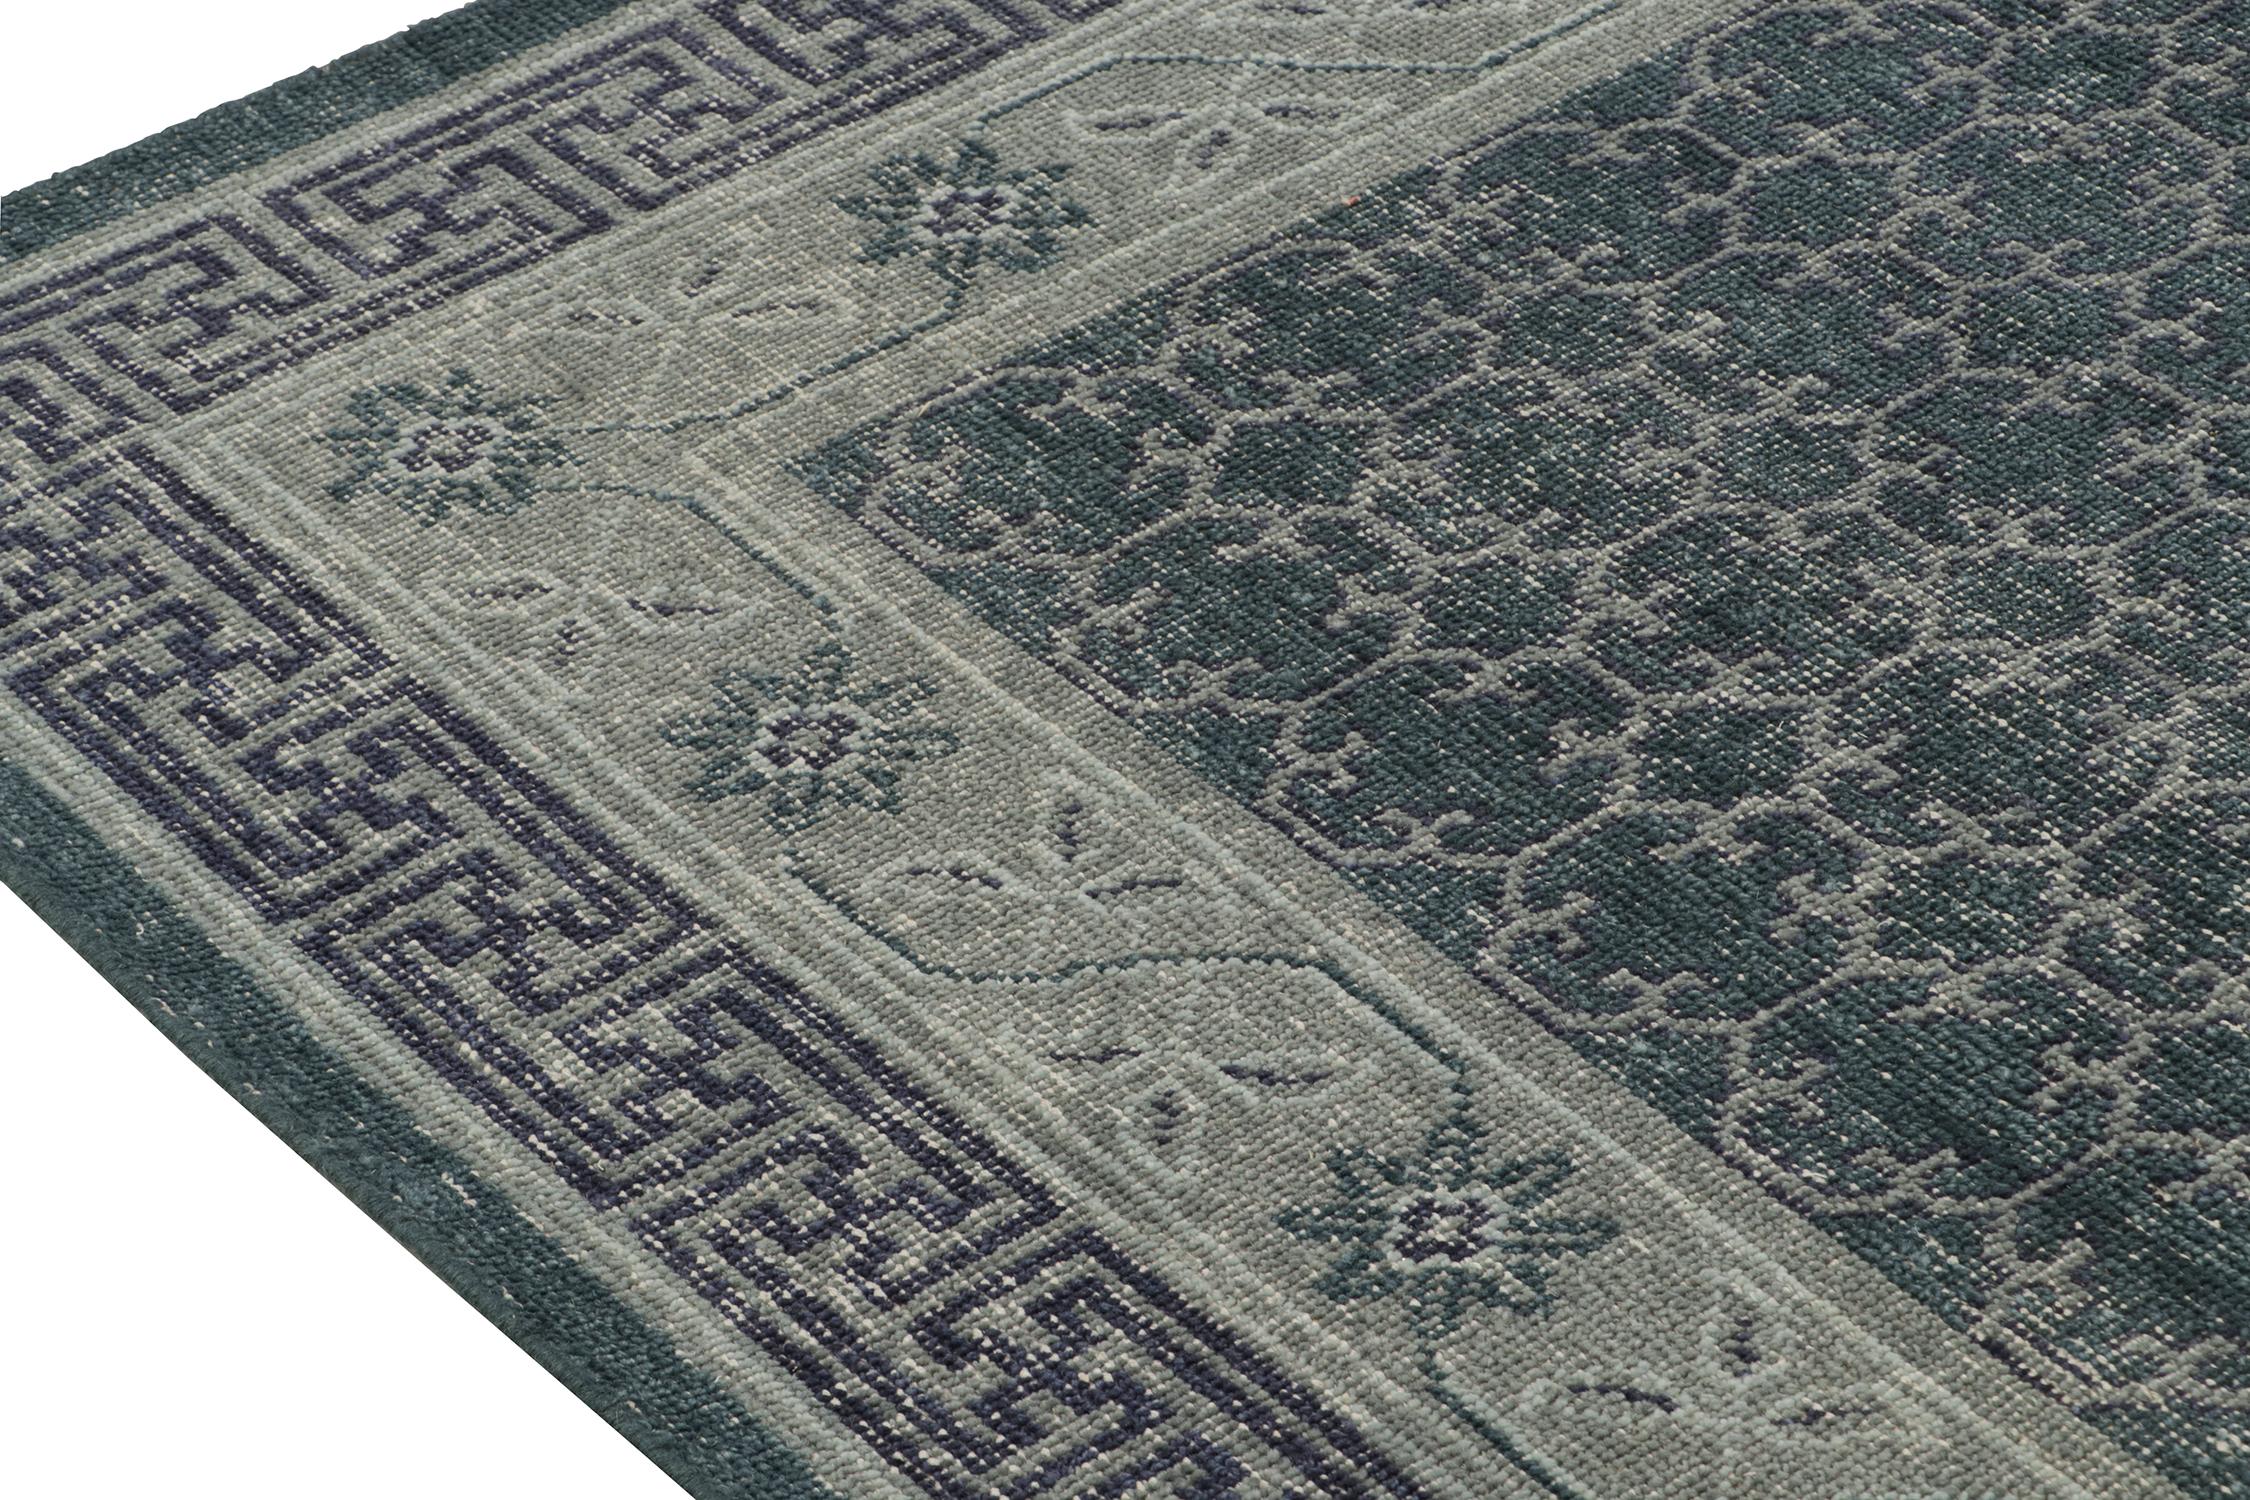 Hand-Knotted Rug & Kilim’s Distressed Khotan style rug in Blue & Gray Geometric Patterns For Sale